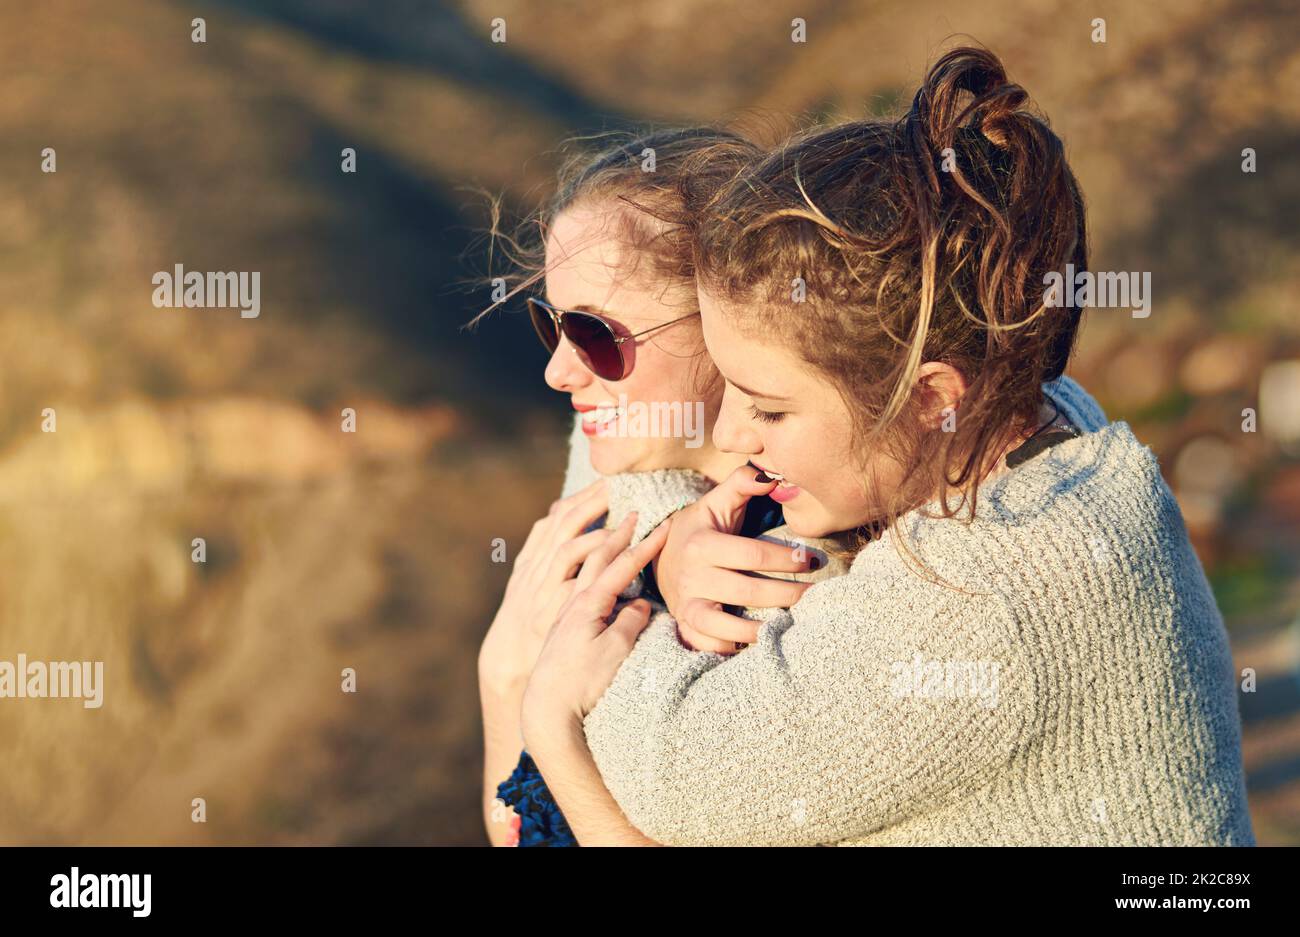 Friends forever. Cropped shot of a teenage girl embracing her best friend outdoors. Stock Photo